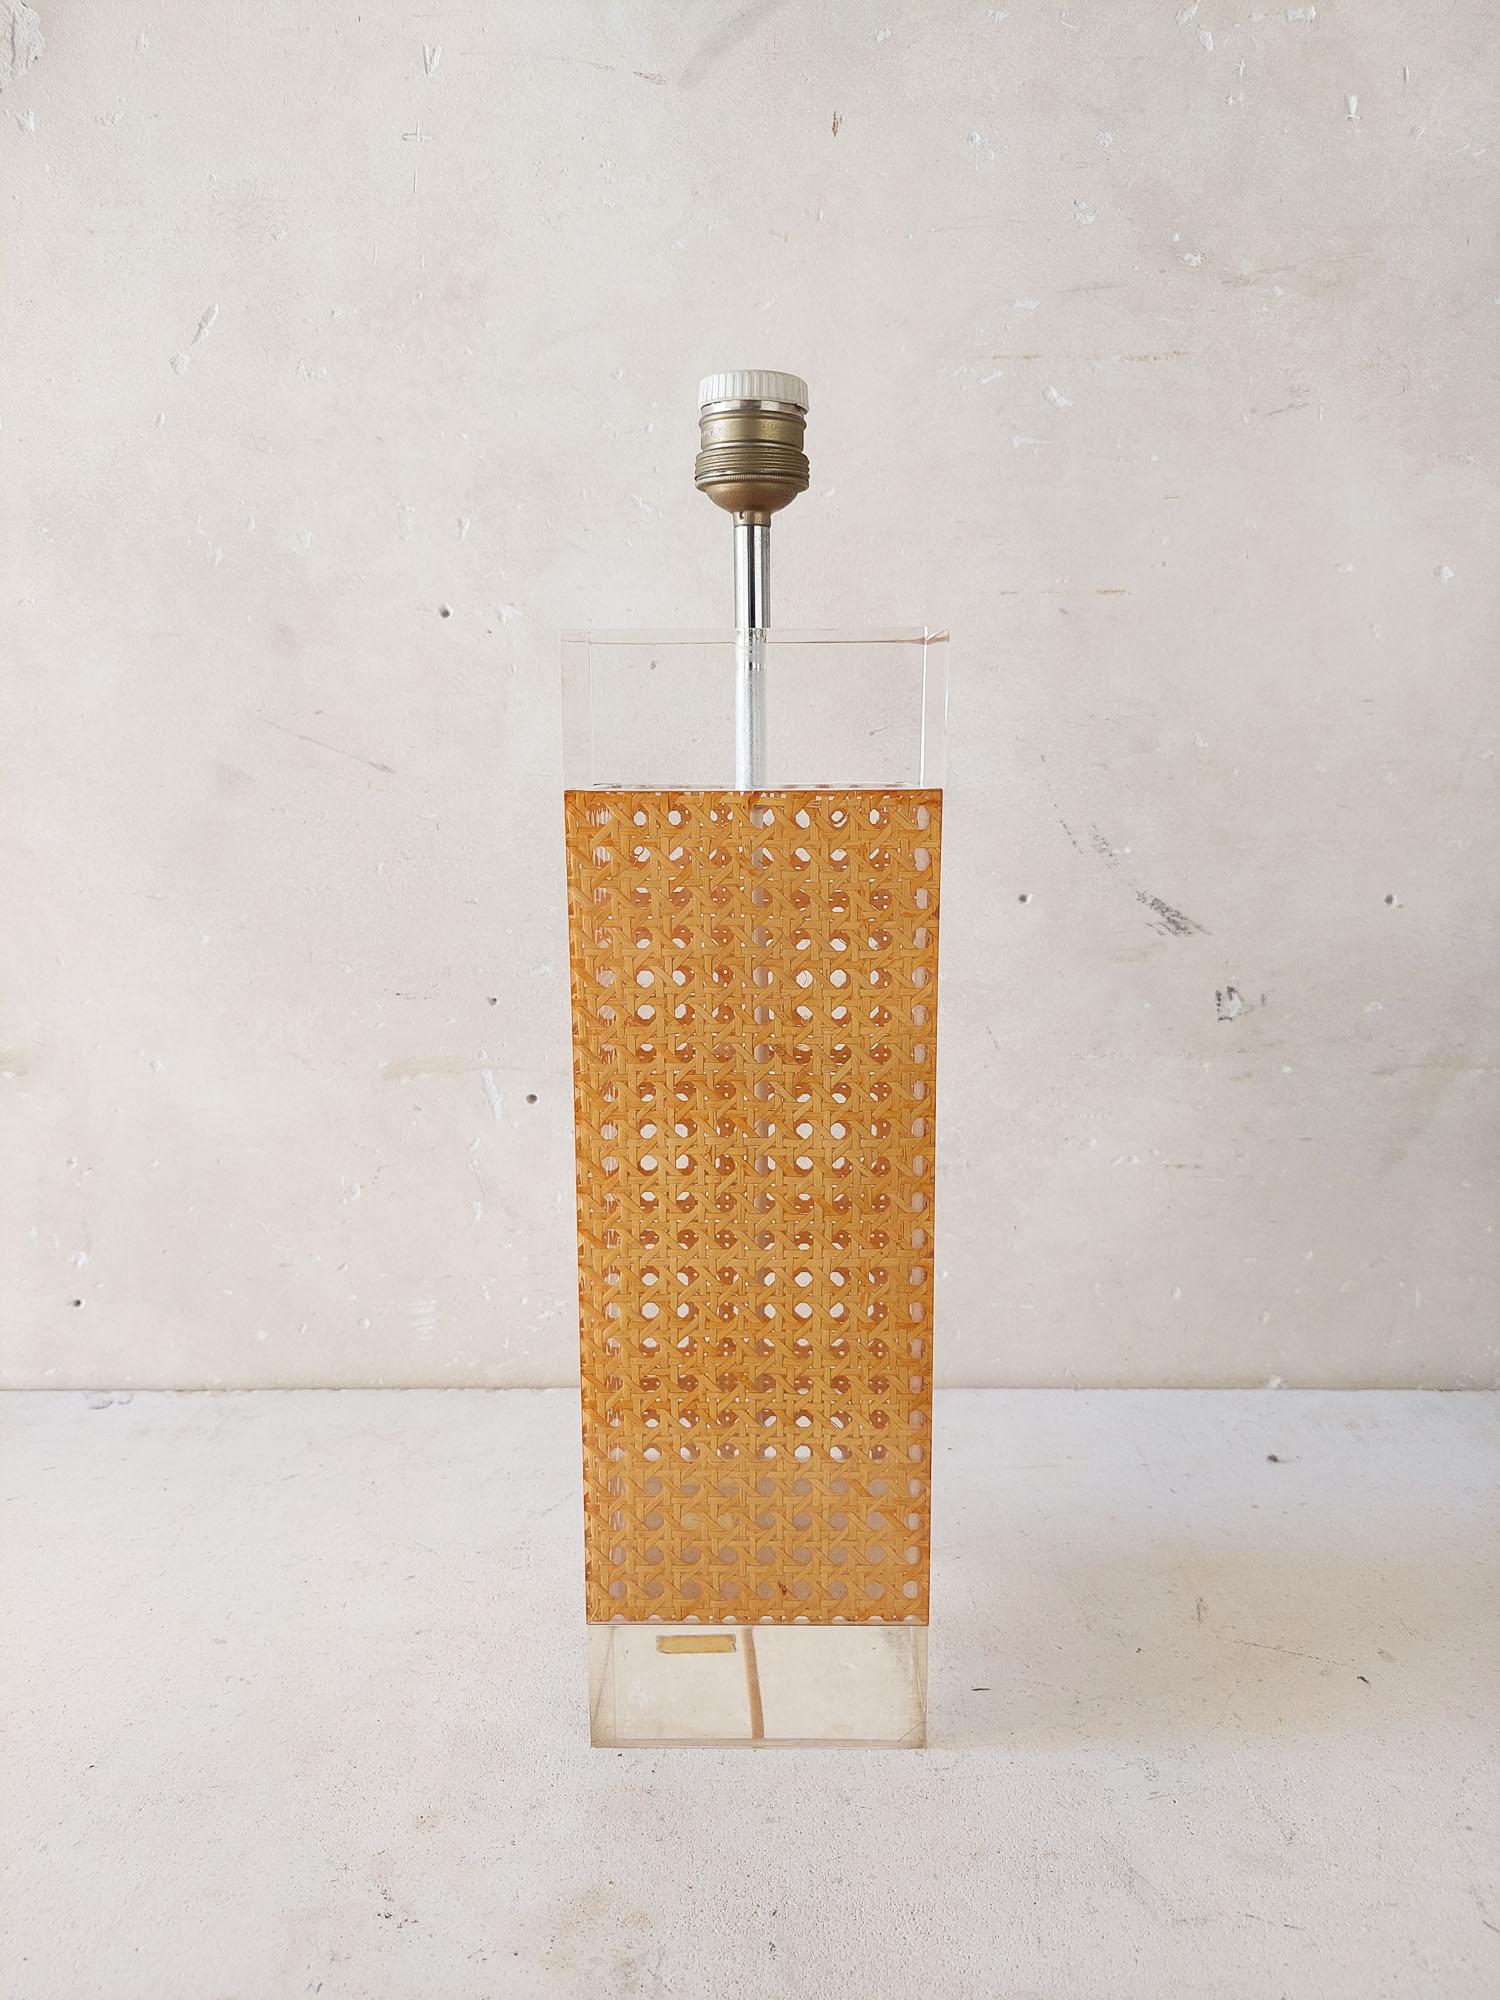 Elegant mid-century table lamp in rattan and plexiglass from Dior Homestyle, large size, 1970s. Sold by Correa, Barcelona.

h 30.5 x w 14 x d 14 cm

